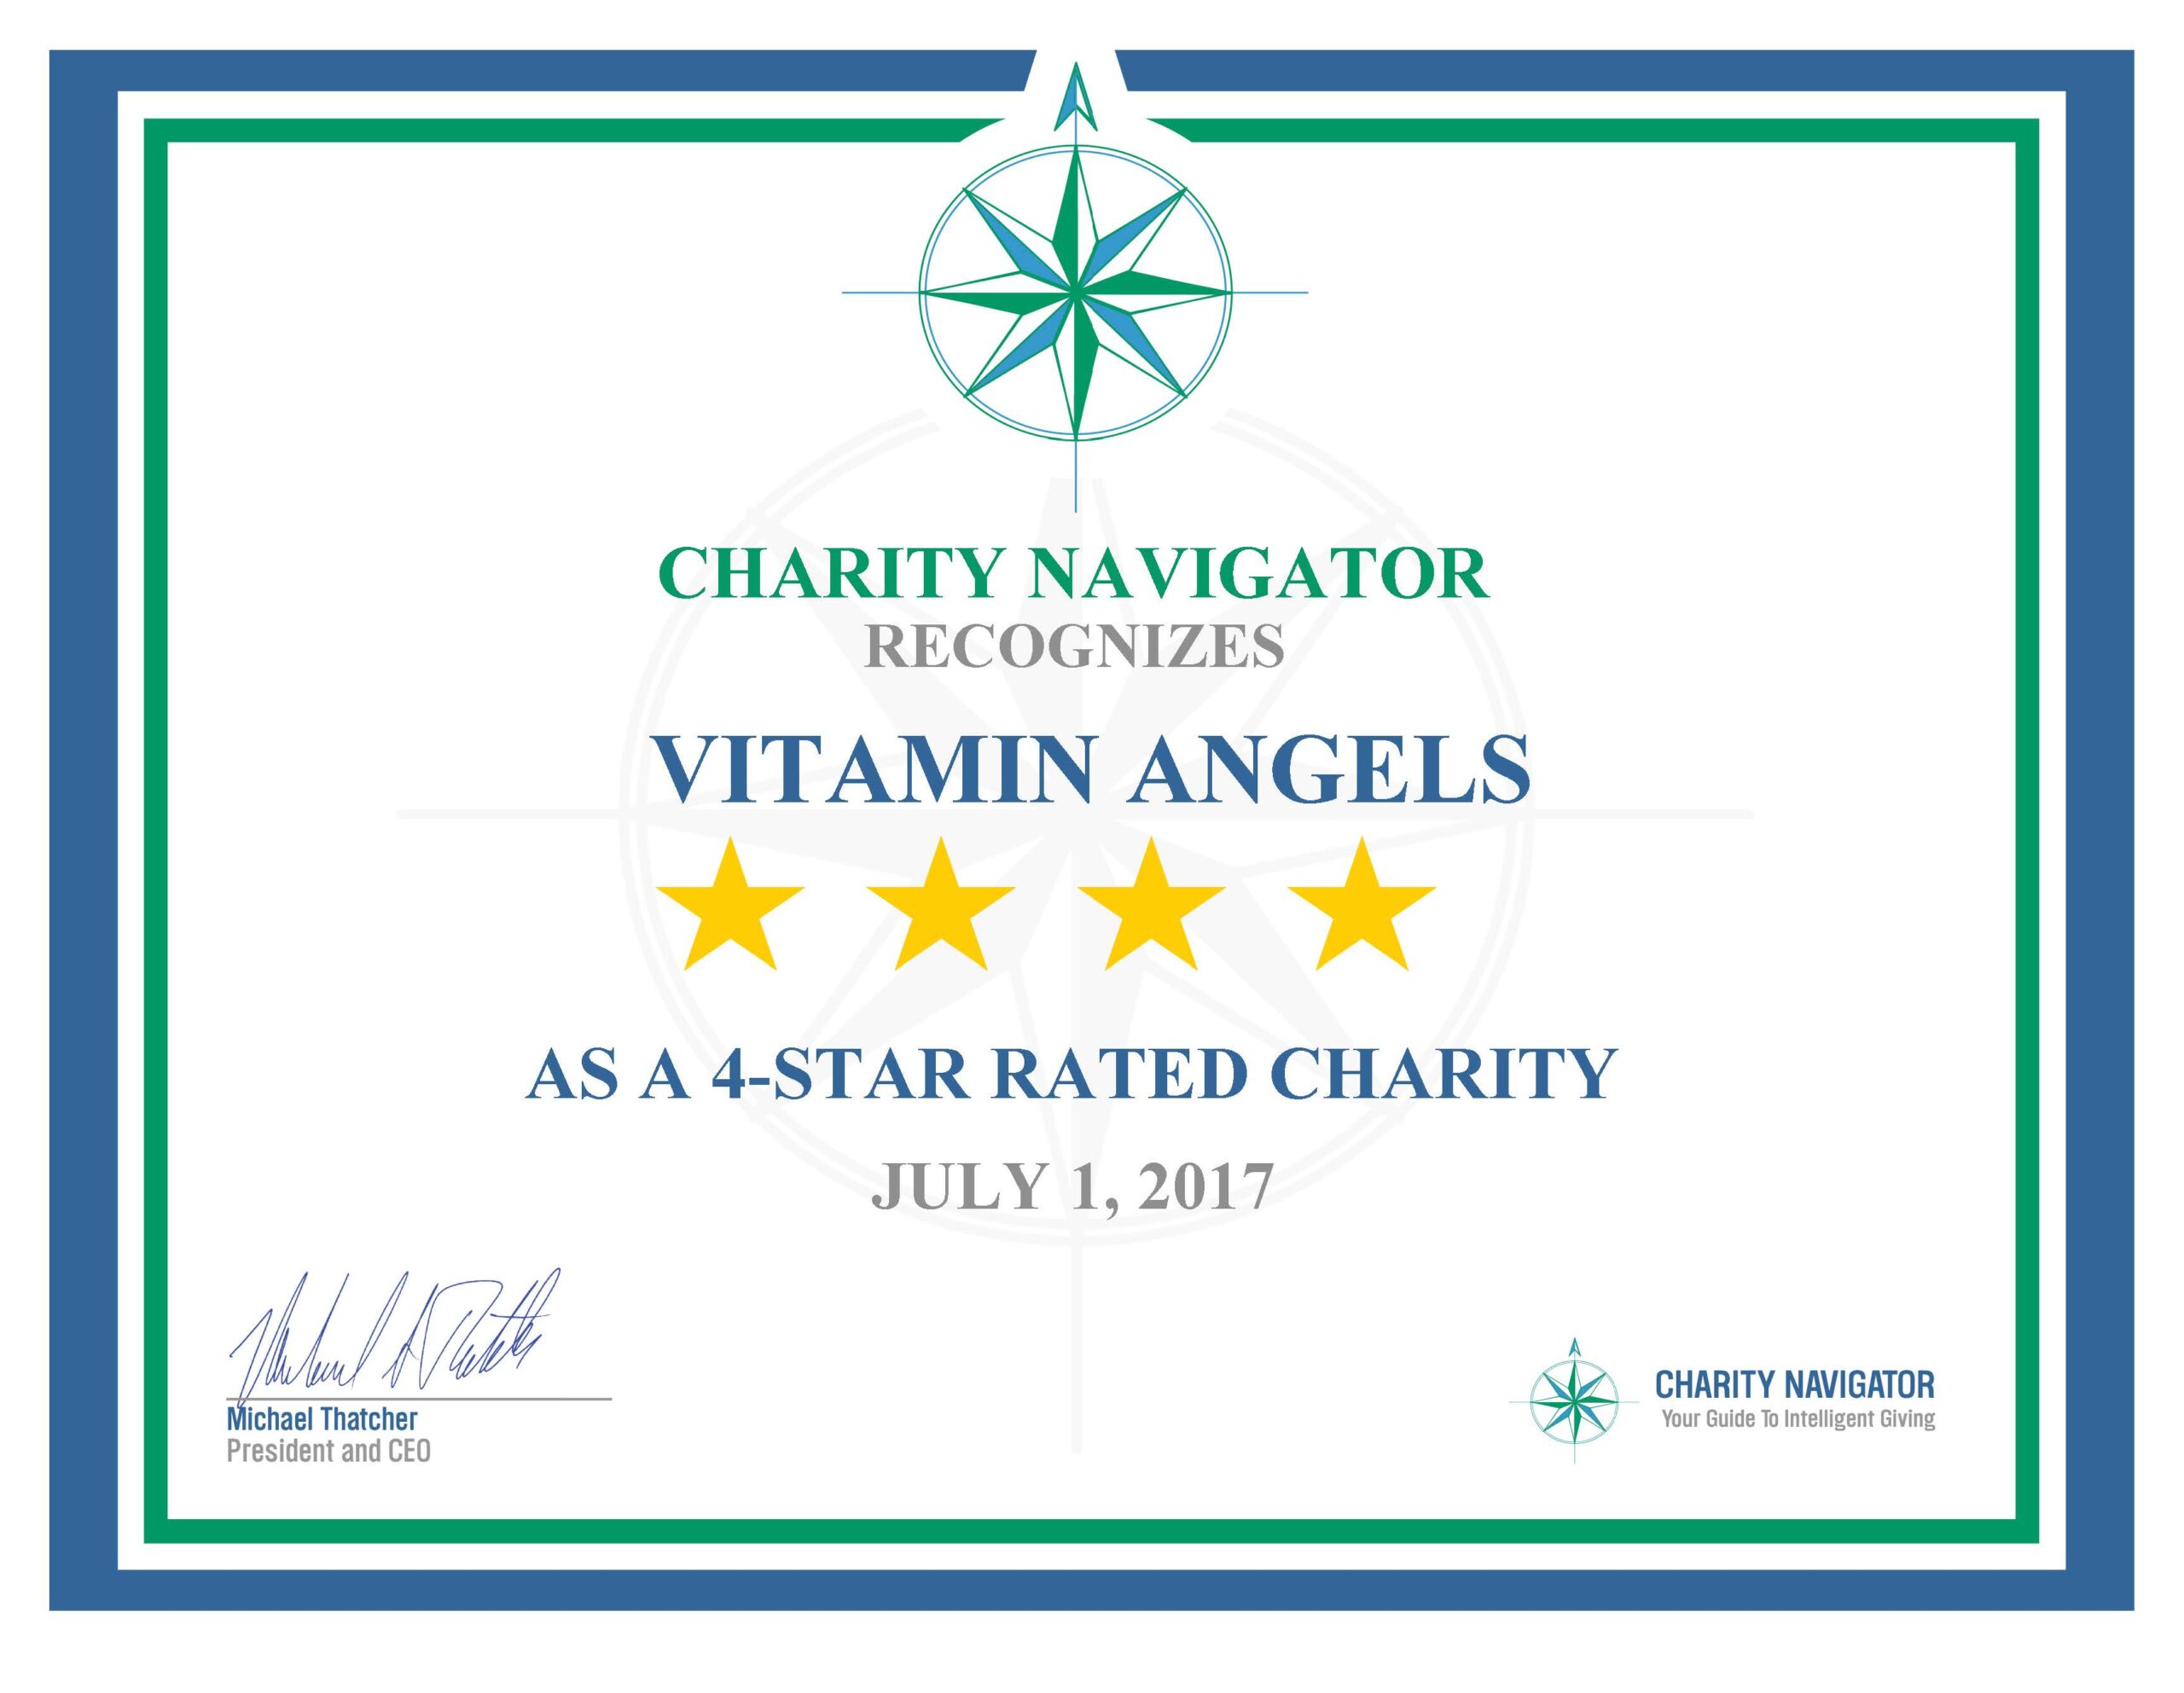 Vitamin Angels Receives Highest Recognition from Charity Navigator